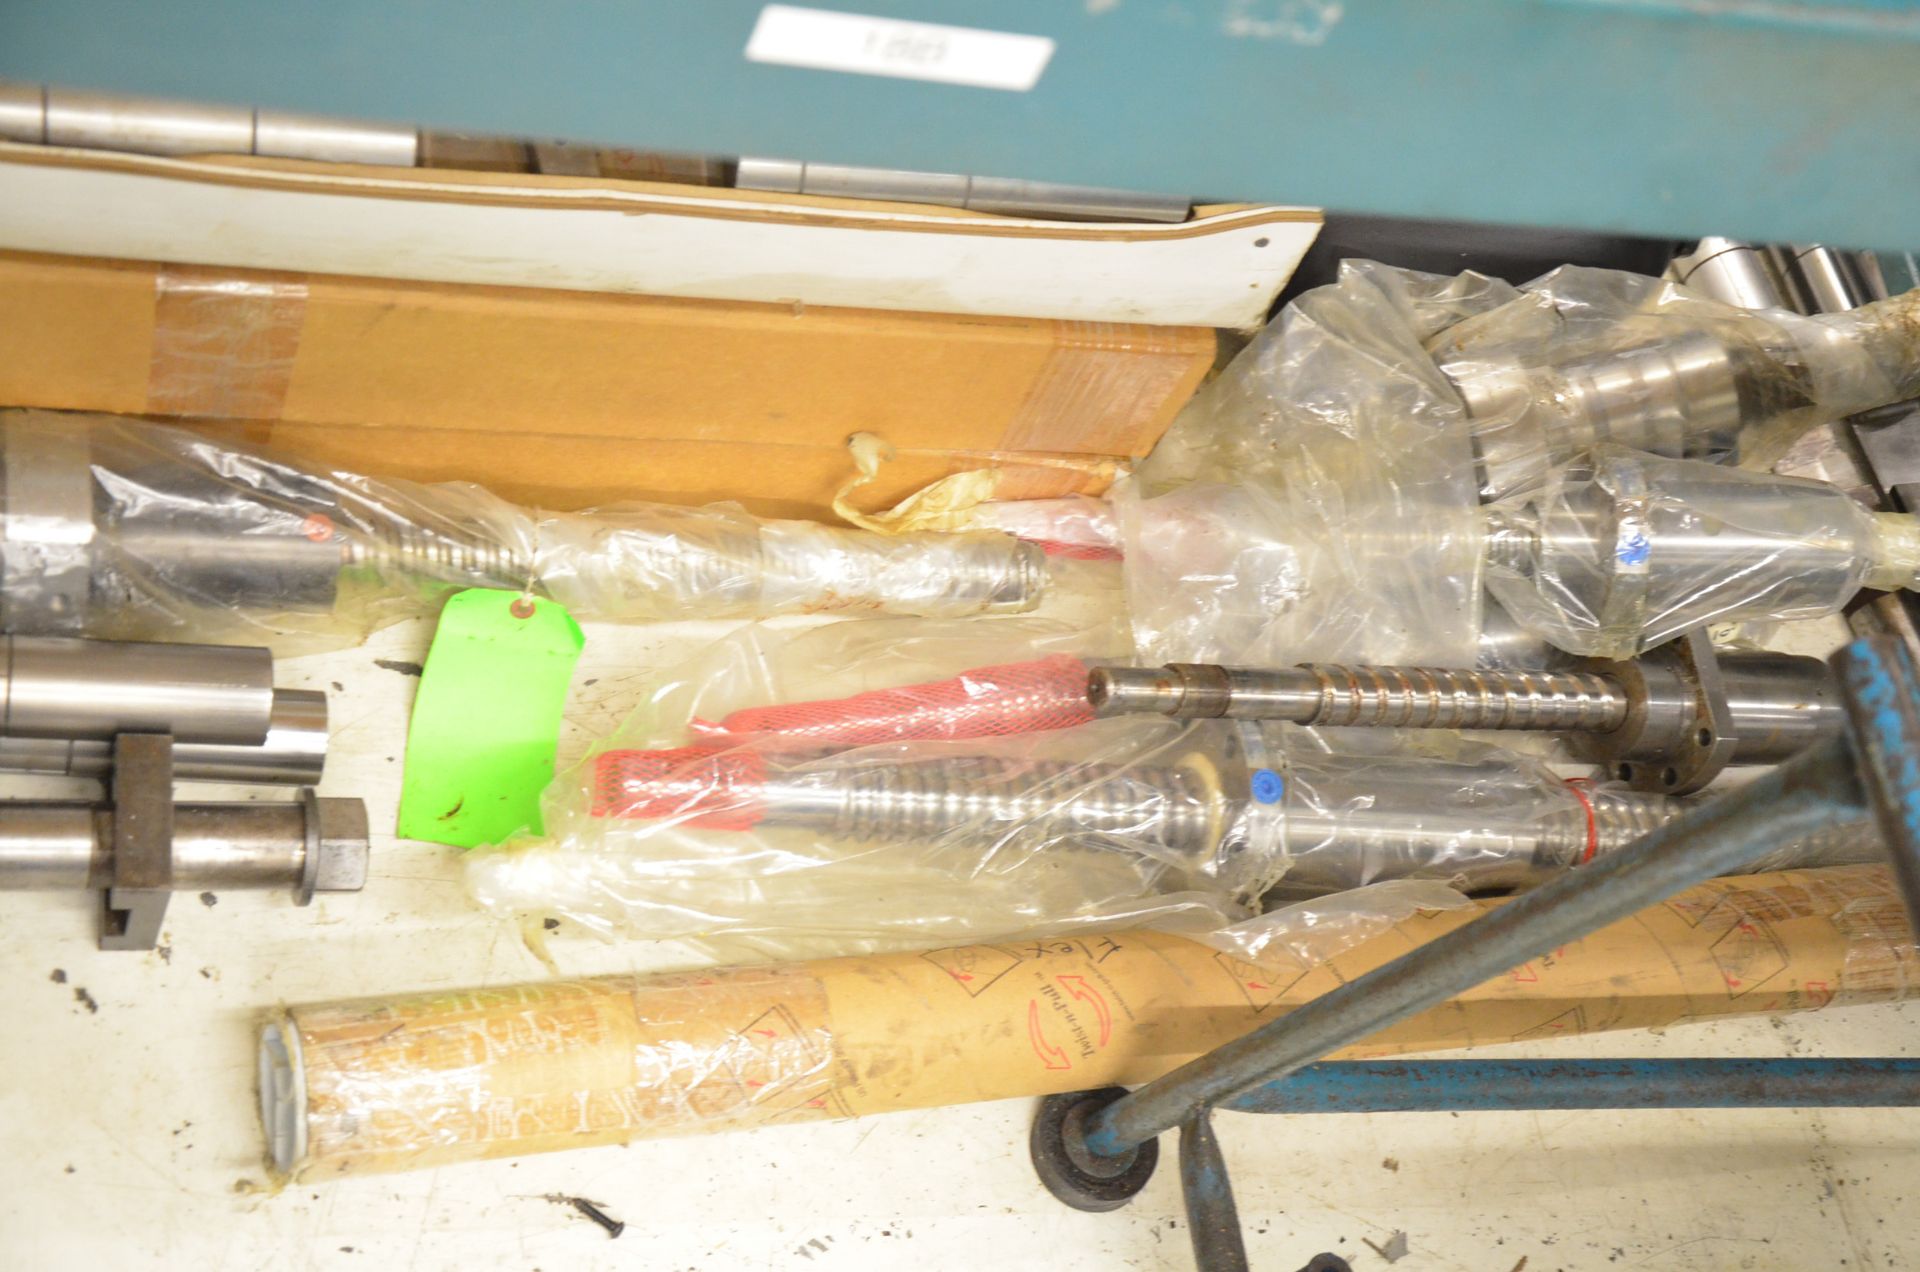 LOT/ CONTENTS OF SHELF - HYDRAULIC ACCUMULATORS, BALL SCREWS AND PARTS - Image 2 of 2